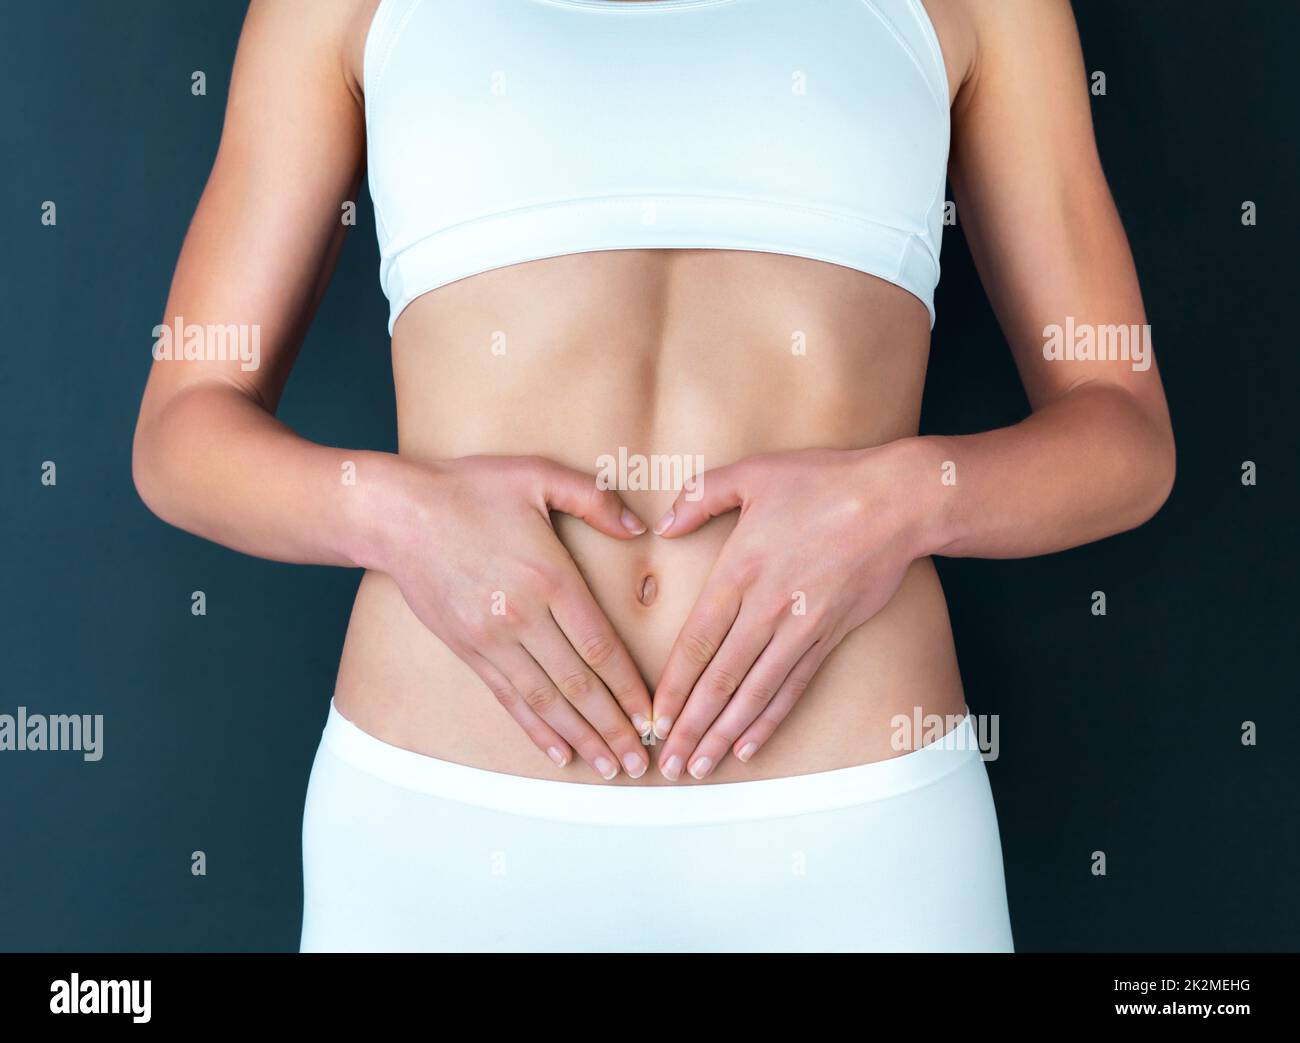 For the greatest wealth, invest in your health. Studio shot of a fit young woman making a heart shaped gesture over her stomach against a dark background. Stock Photo